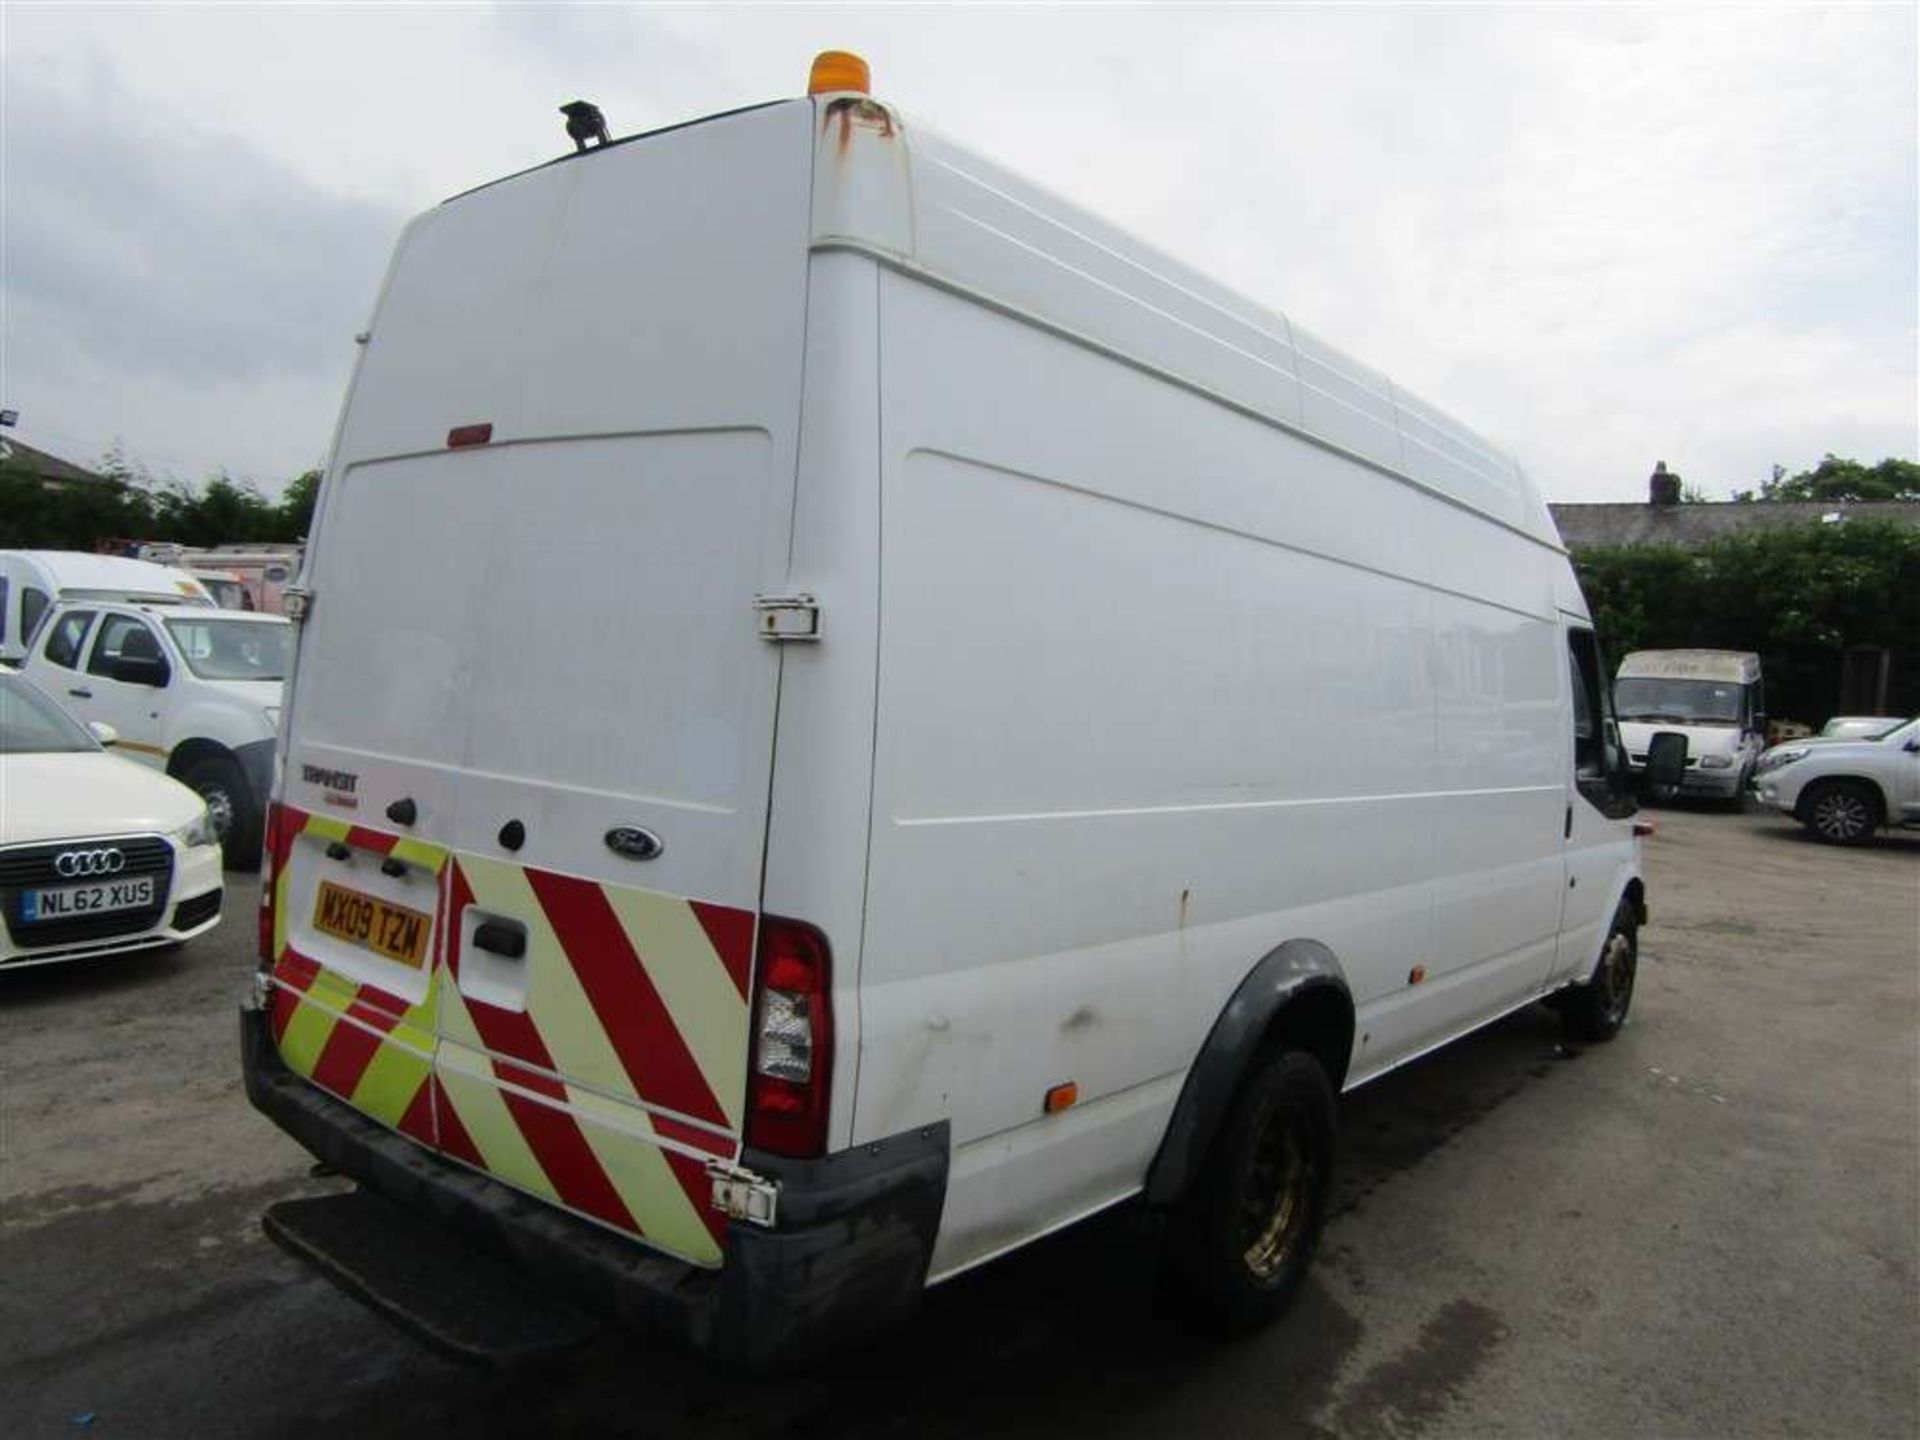 2009 09 reg Ford Transit 200 T460 RWD (Direct Electricity North West) - Image 4 of 7